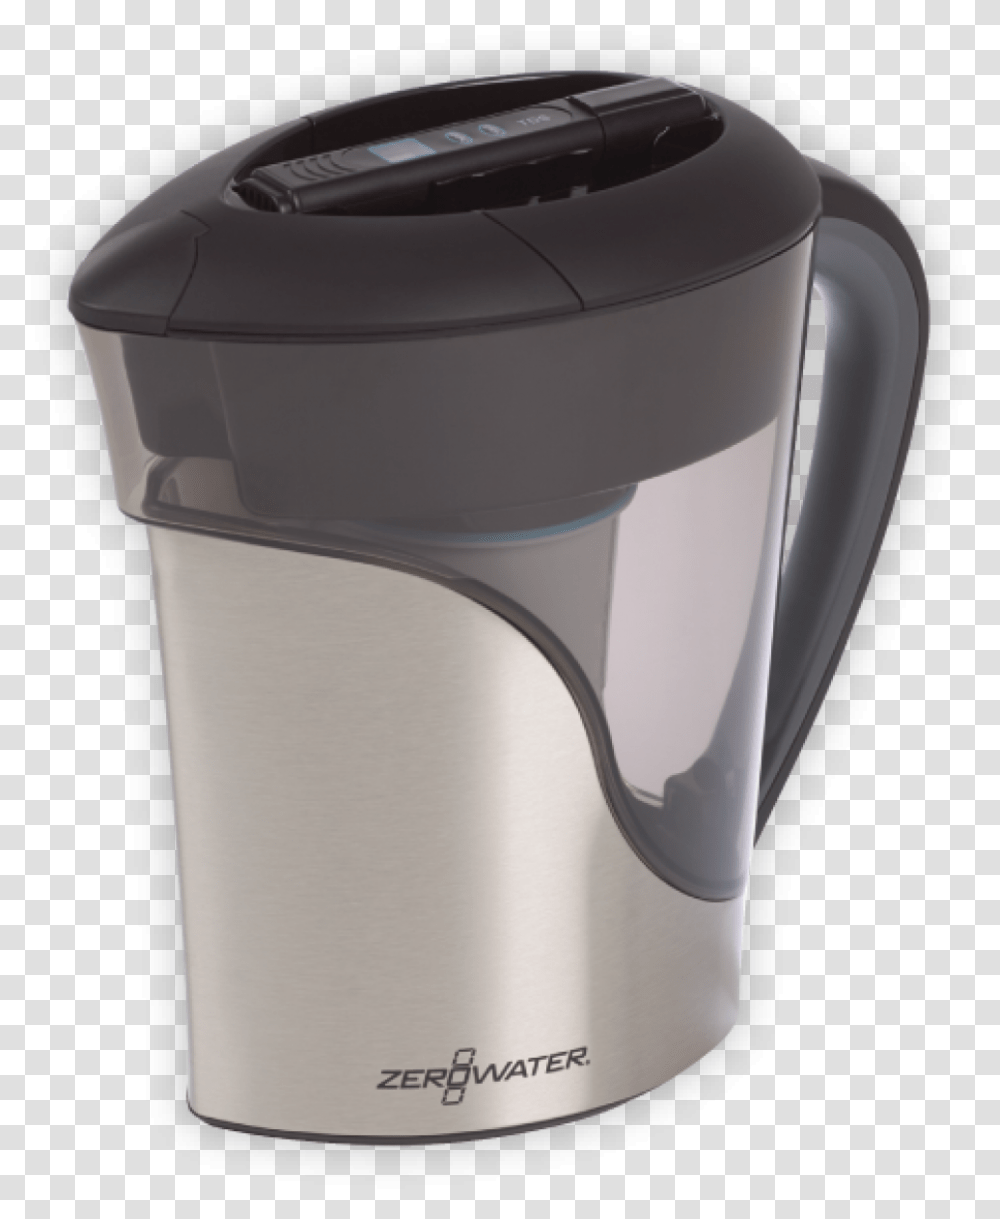 Zs 011rp Zerowater 11 Cup Stainless Steel Pitcher Zerowater, Shaker, Bottle, Mixer, Appliance Transparent Png